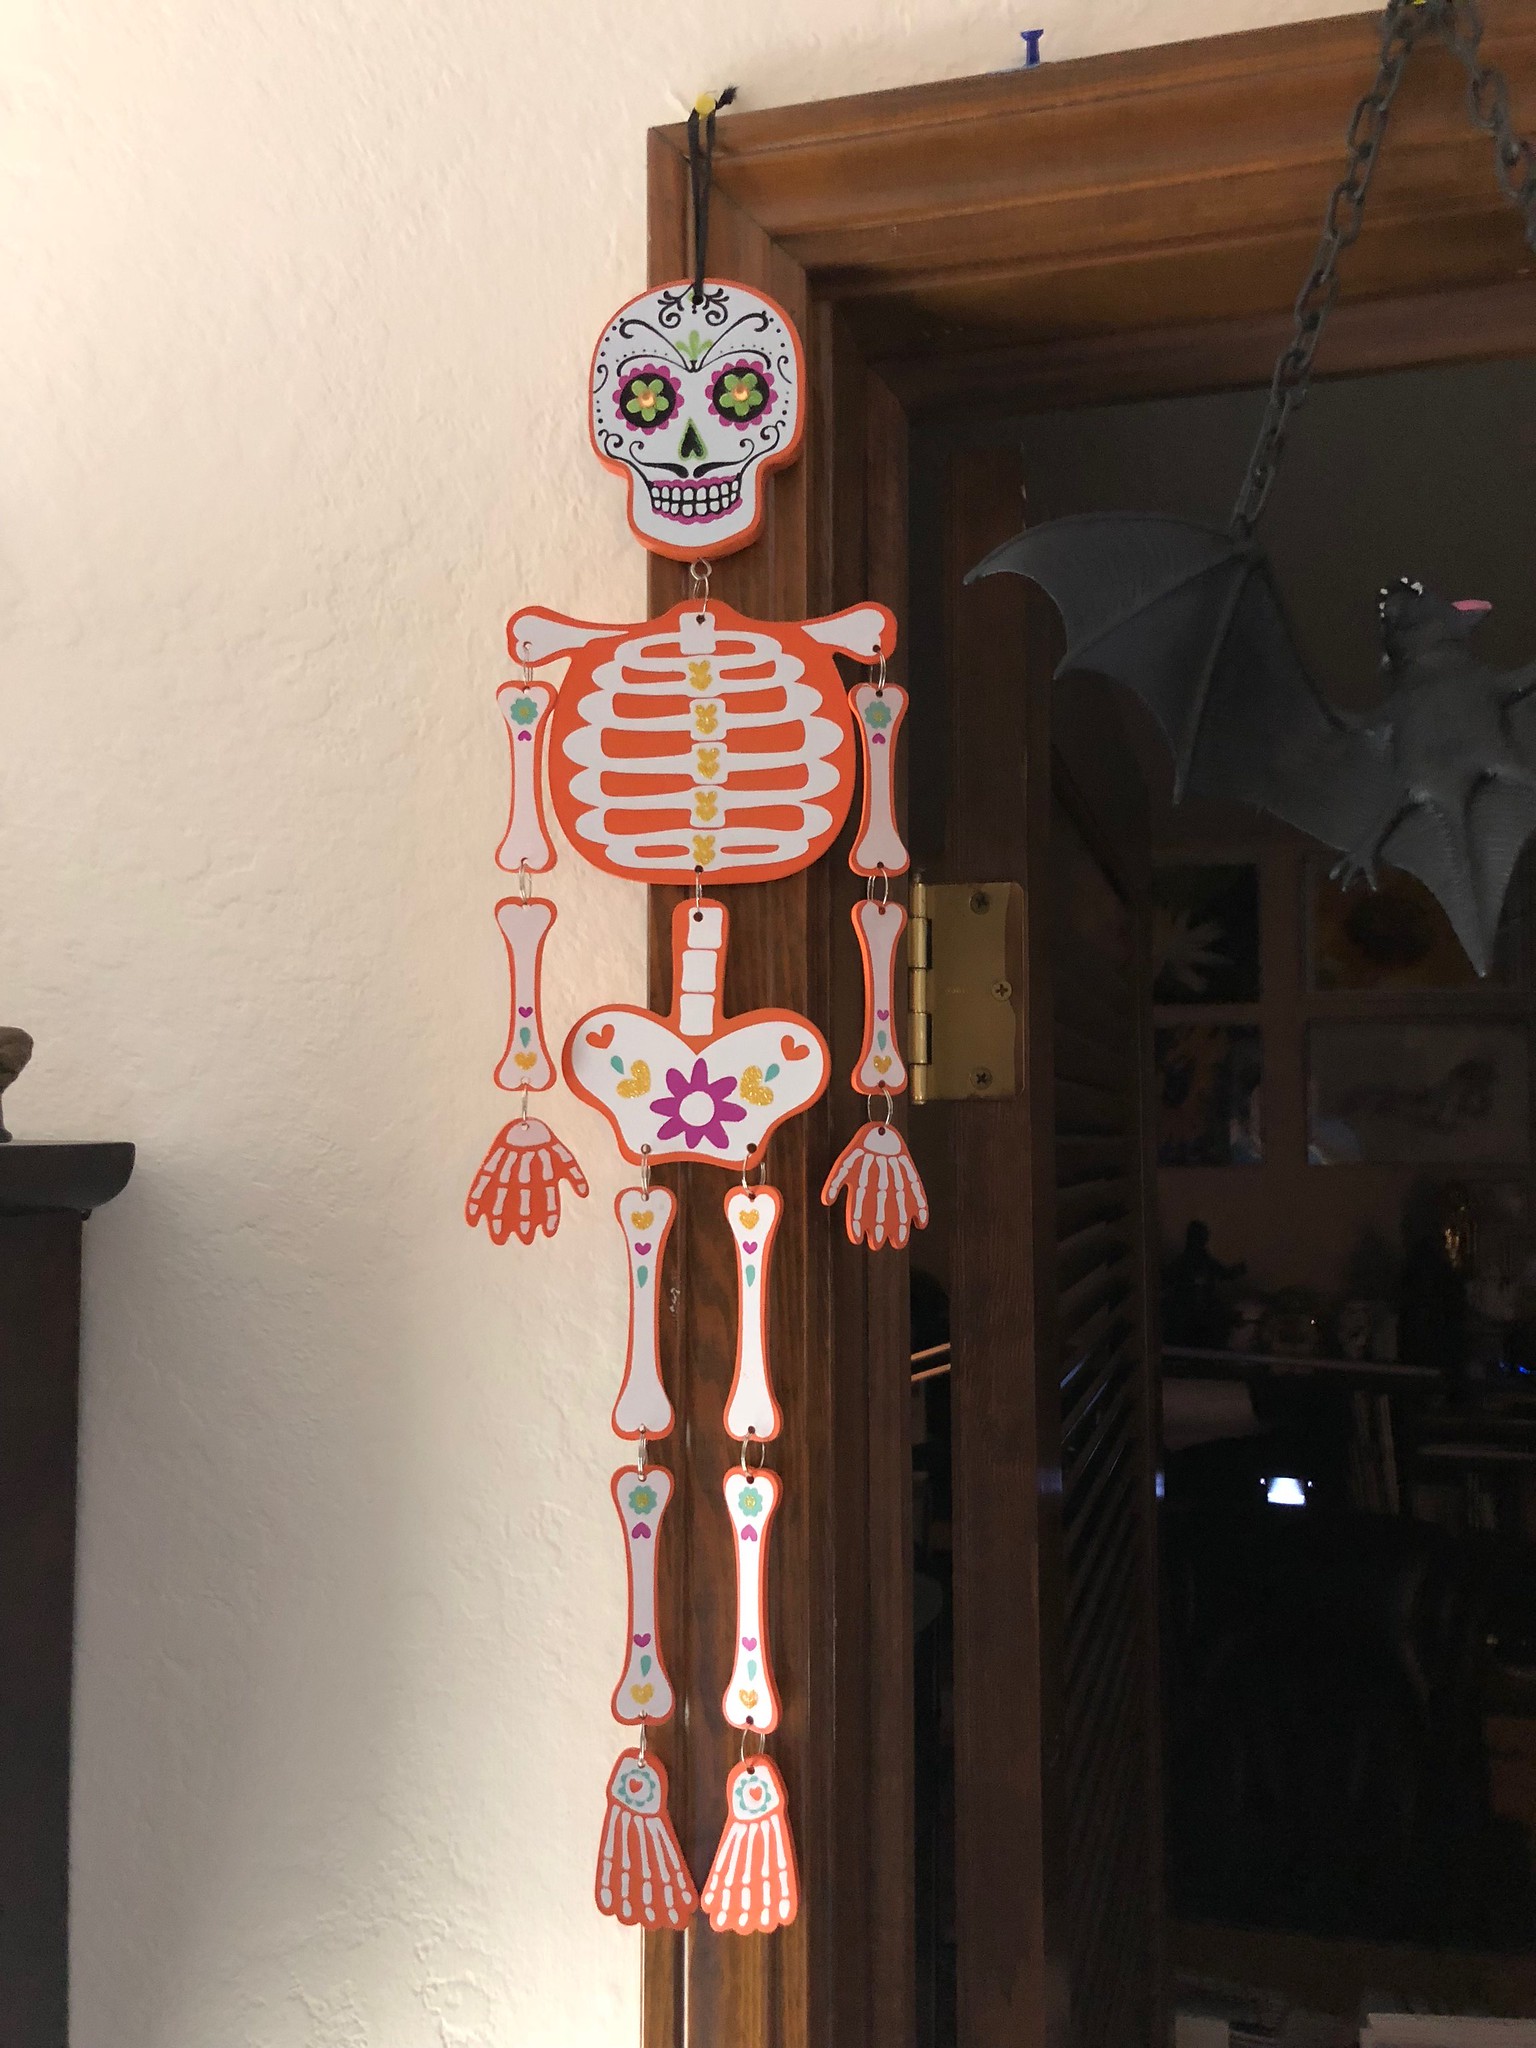 Another Skeleton